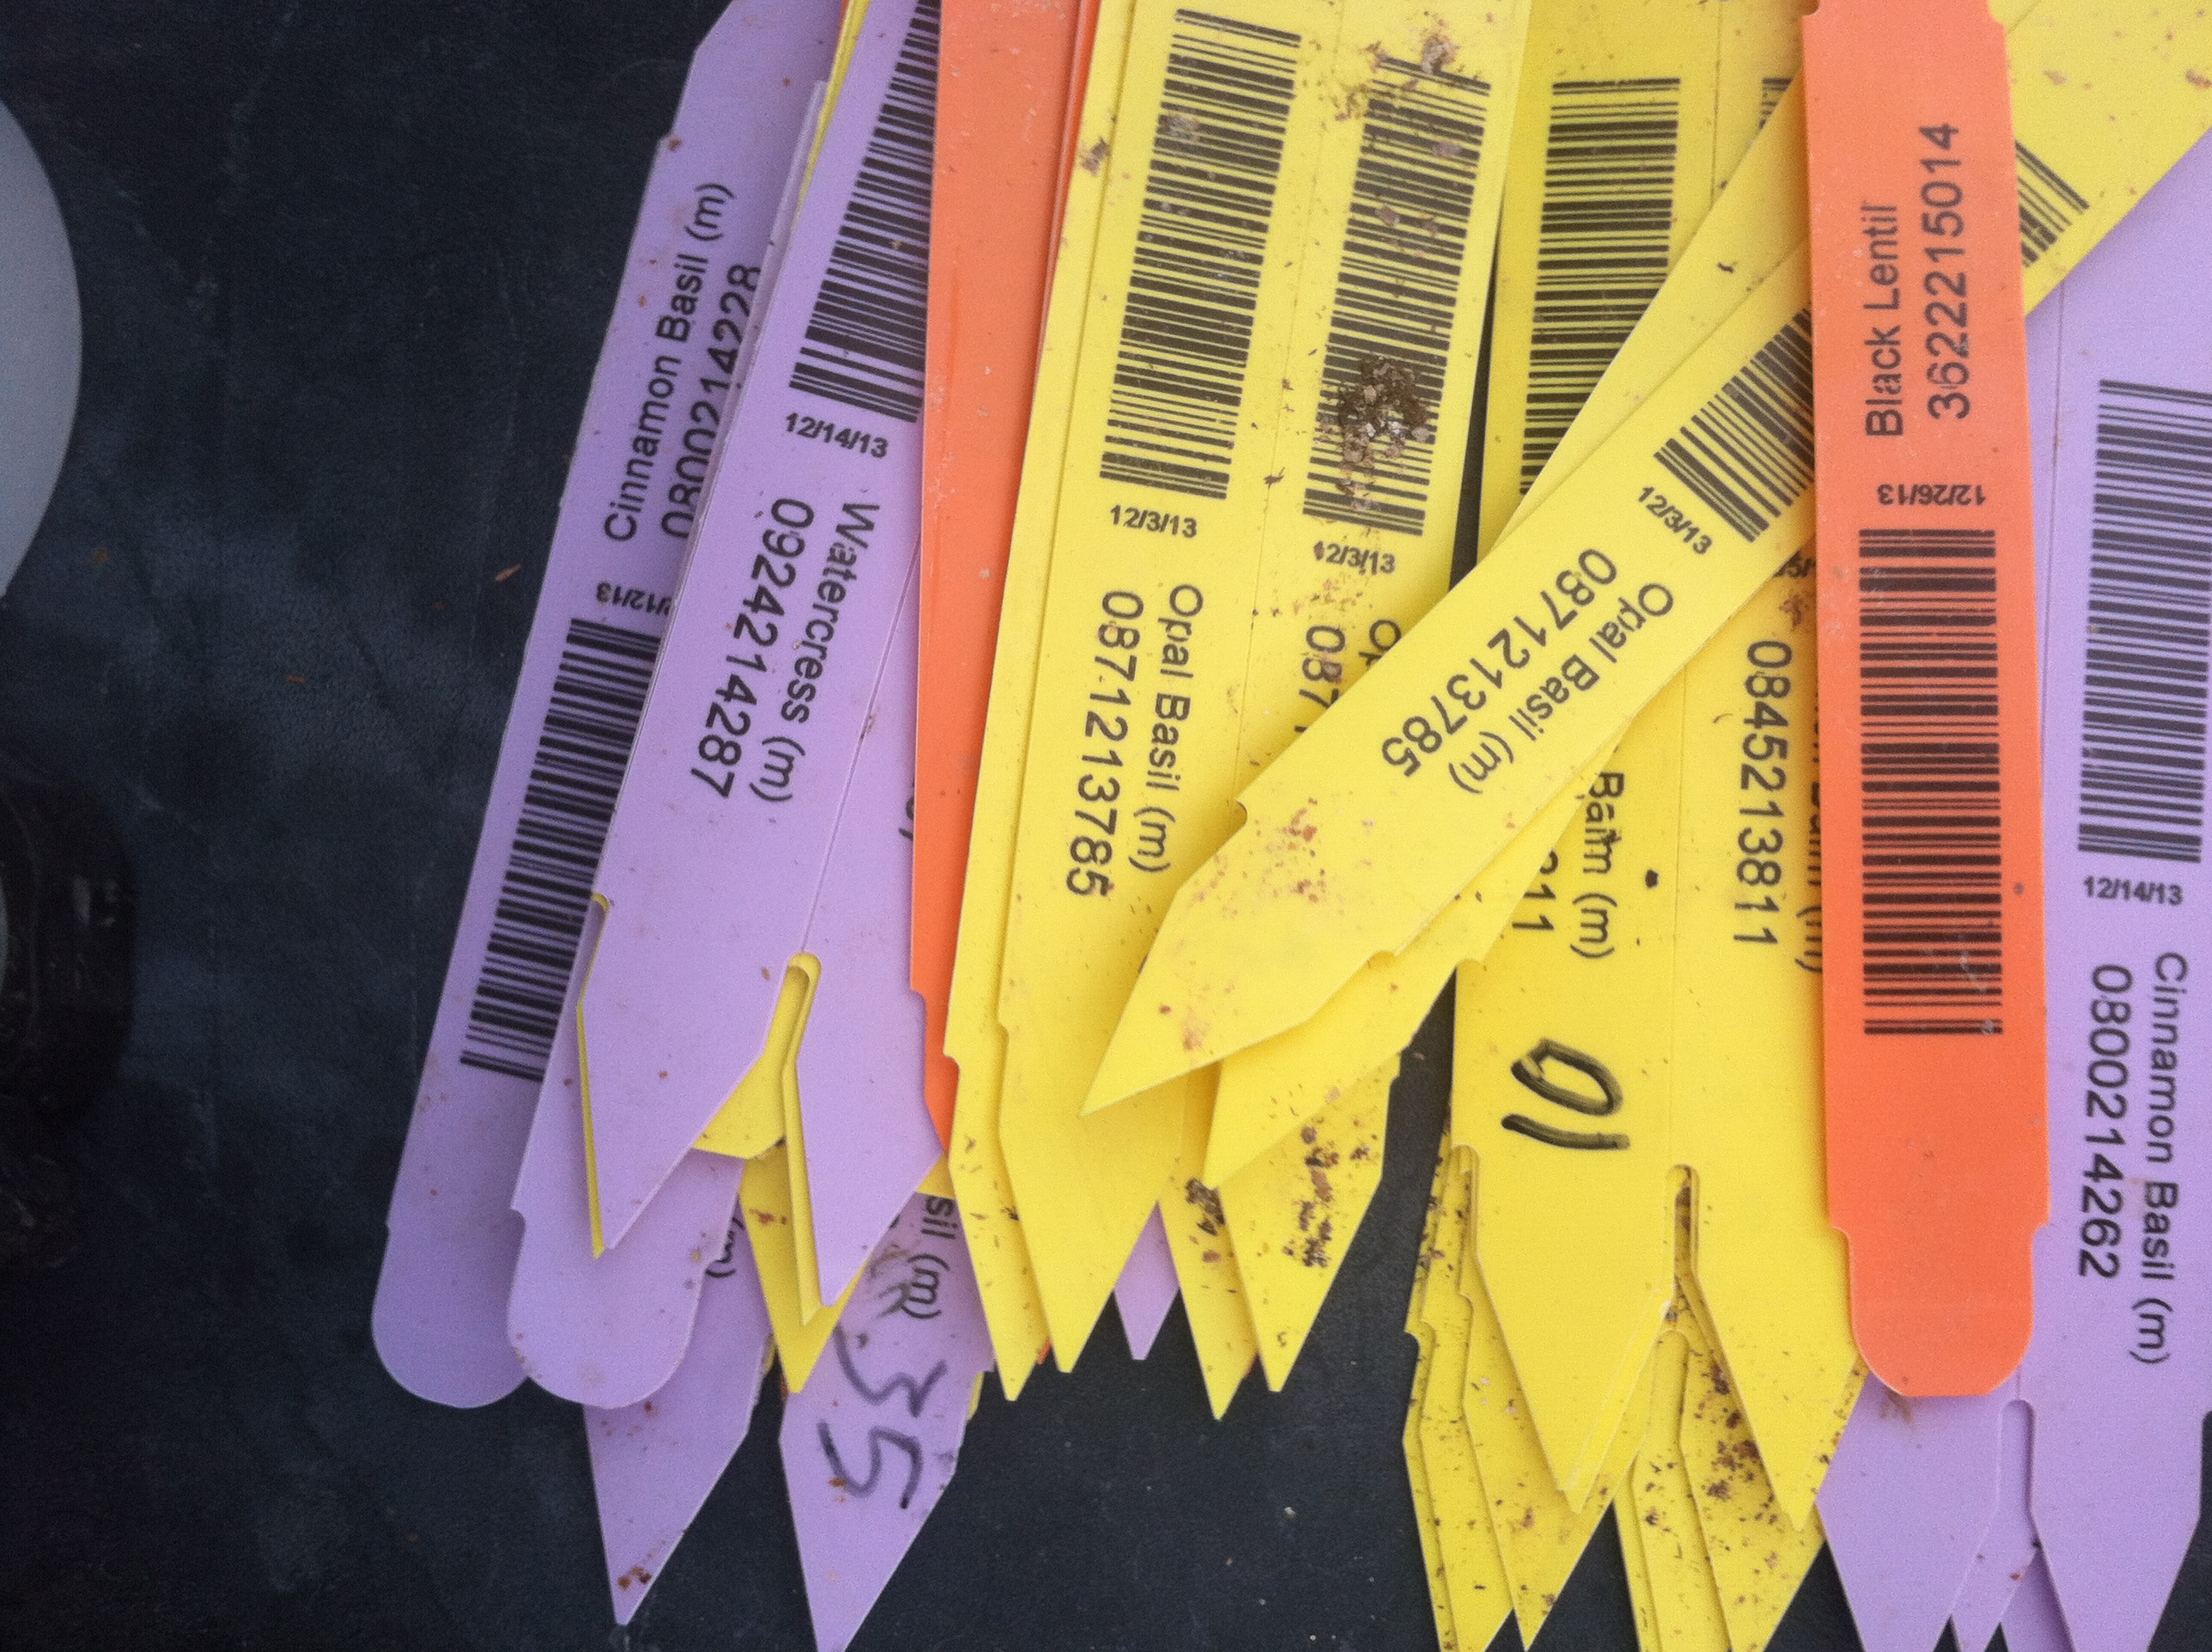 Bar codes that track crops from the soil to the customer.